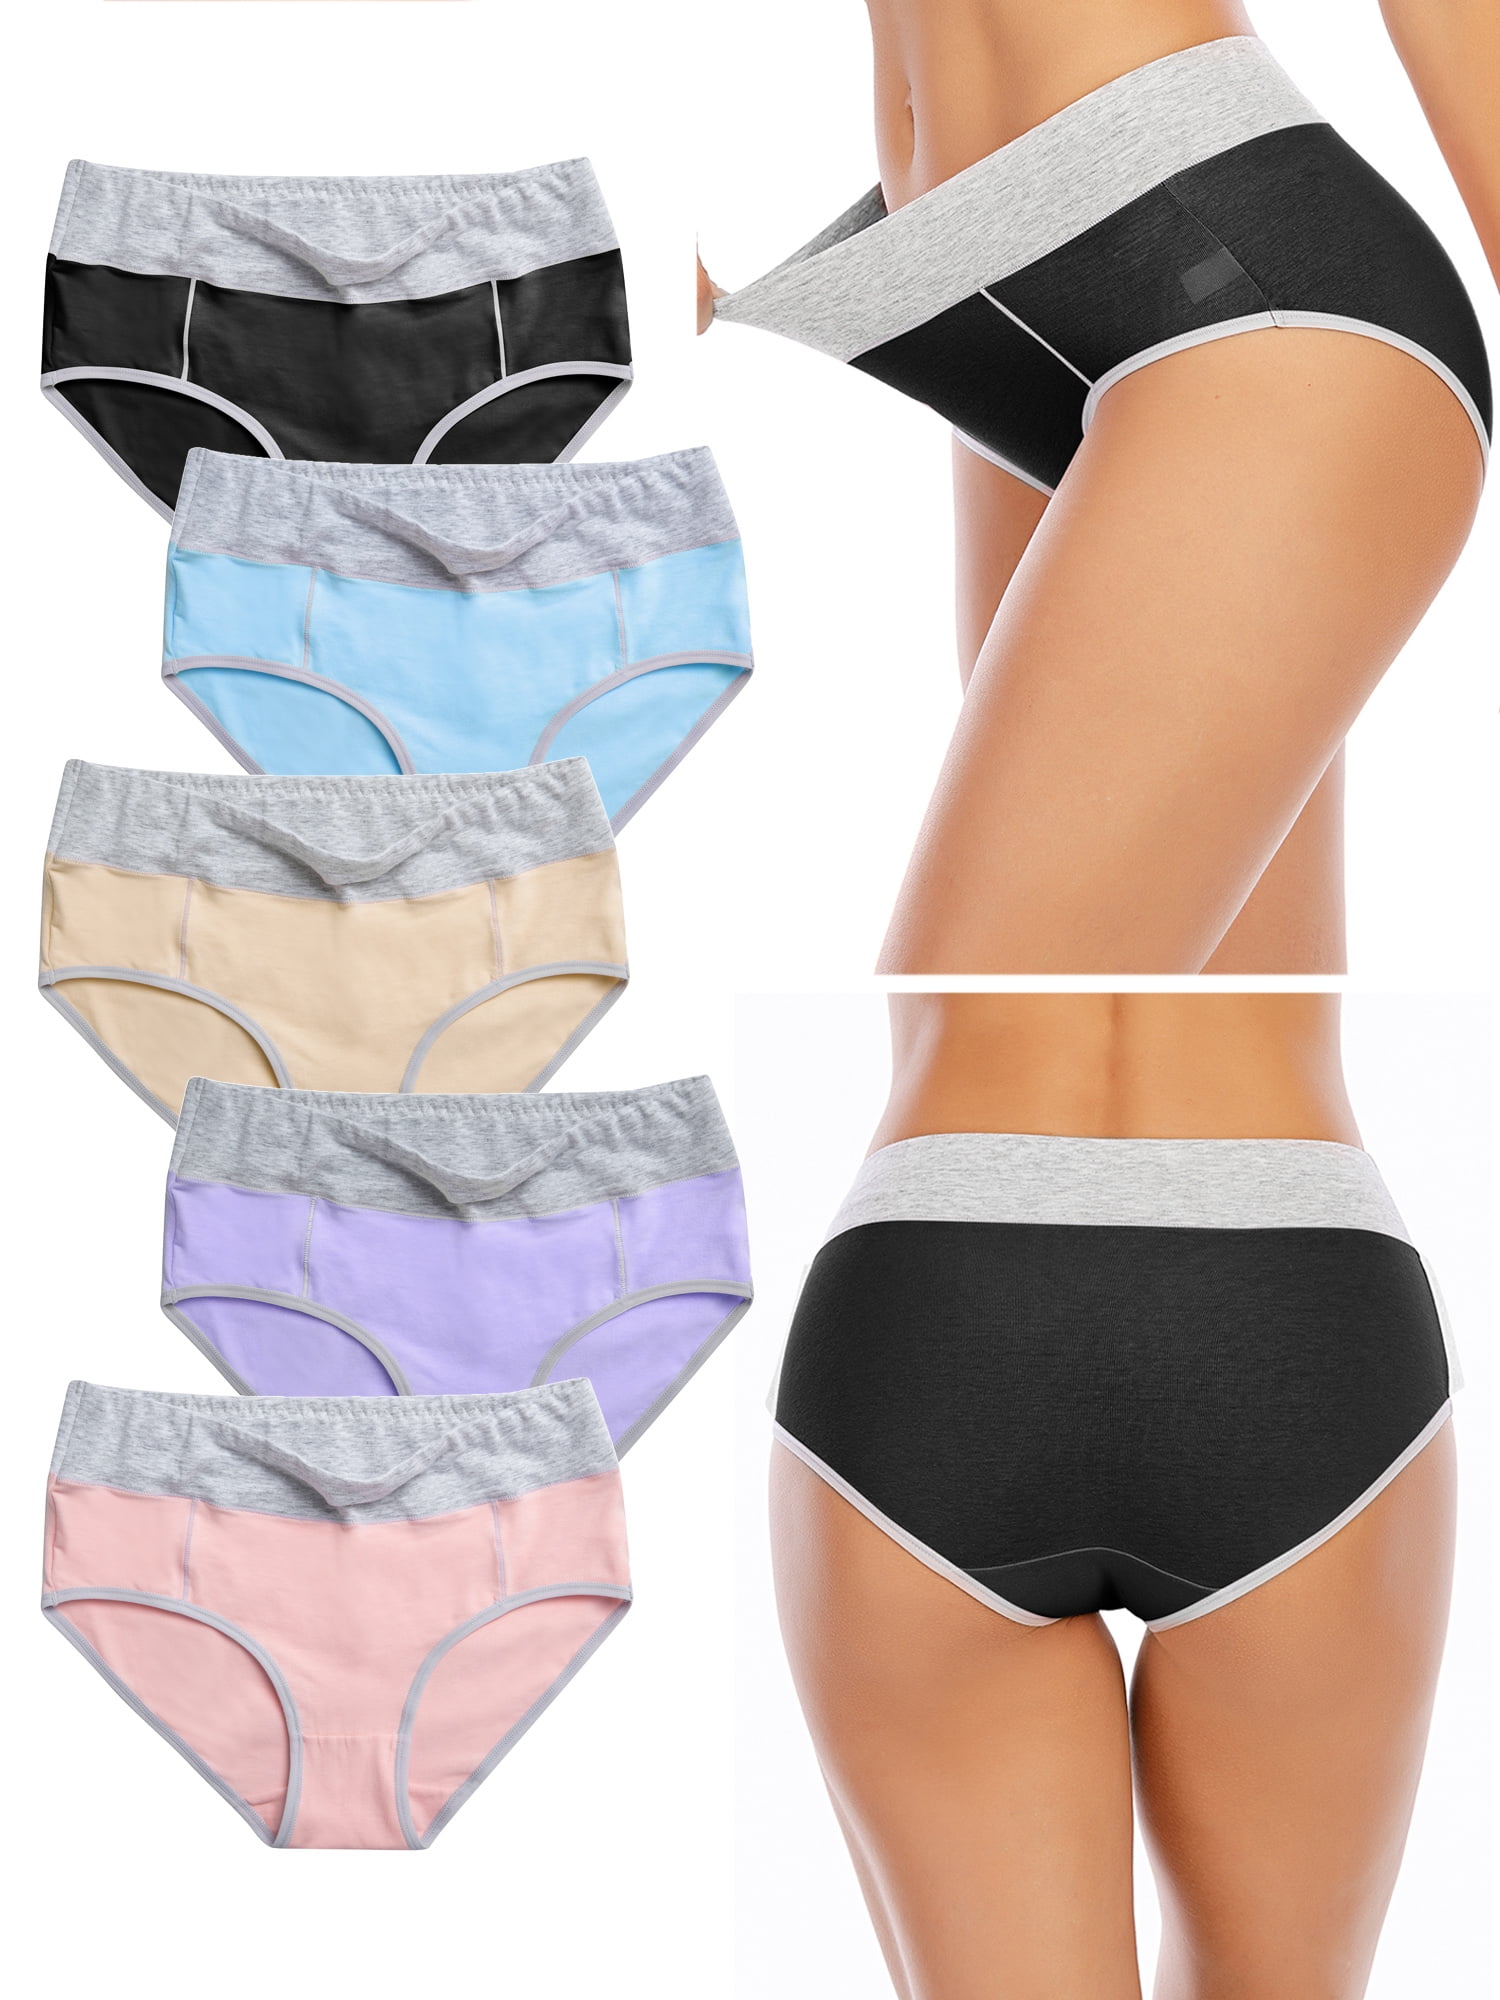 INNERSY Underwear for Women Cotton Hipster Breathable Panties 4 Pack  (S,Black/Beige)